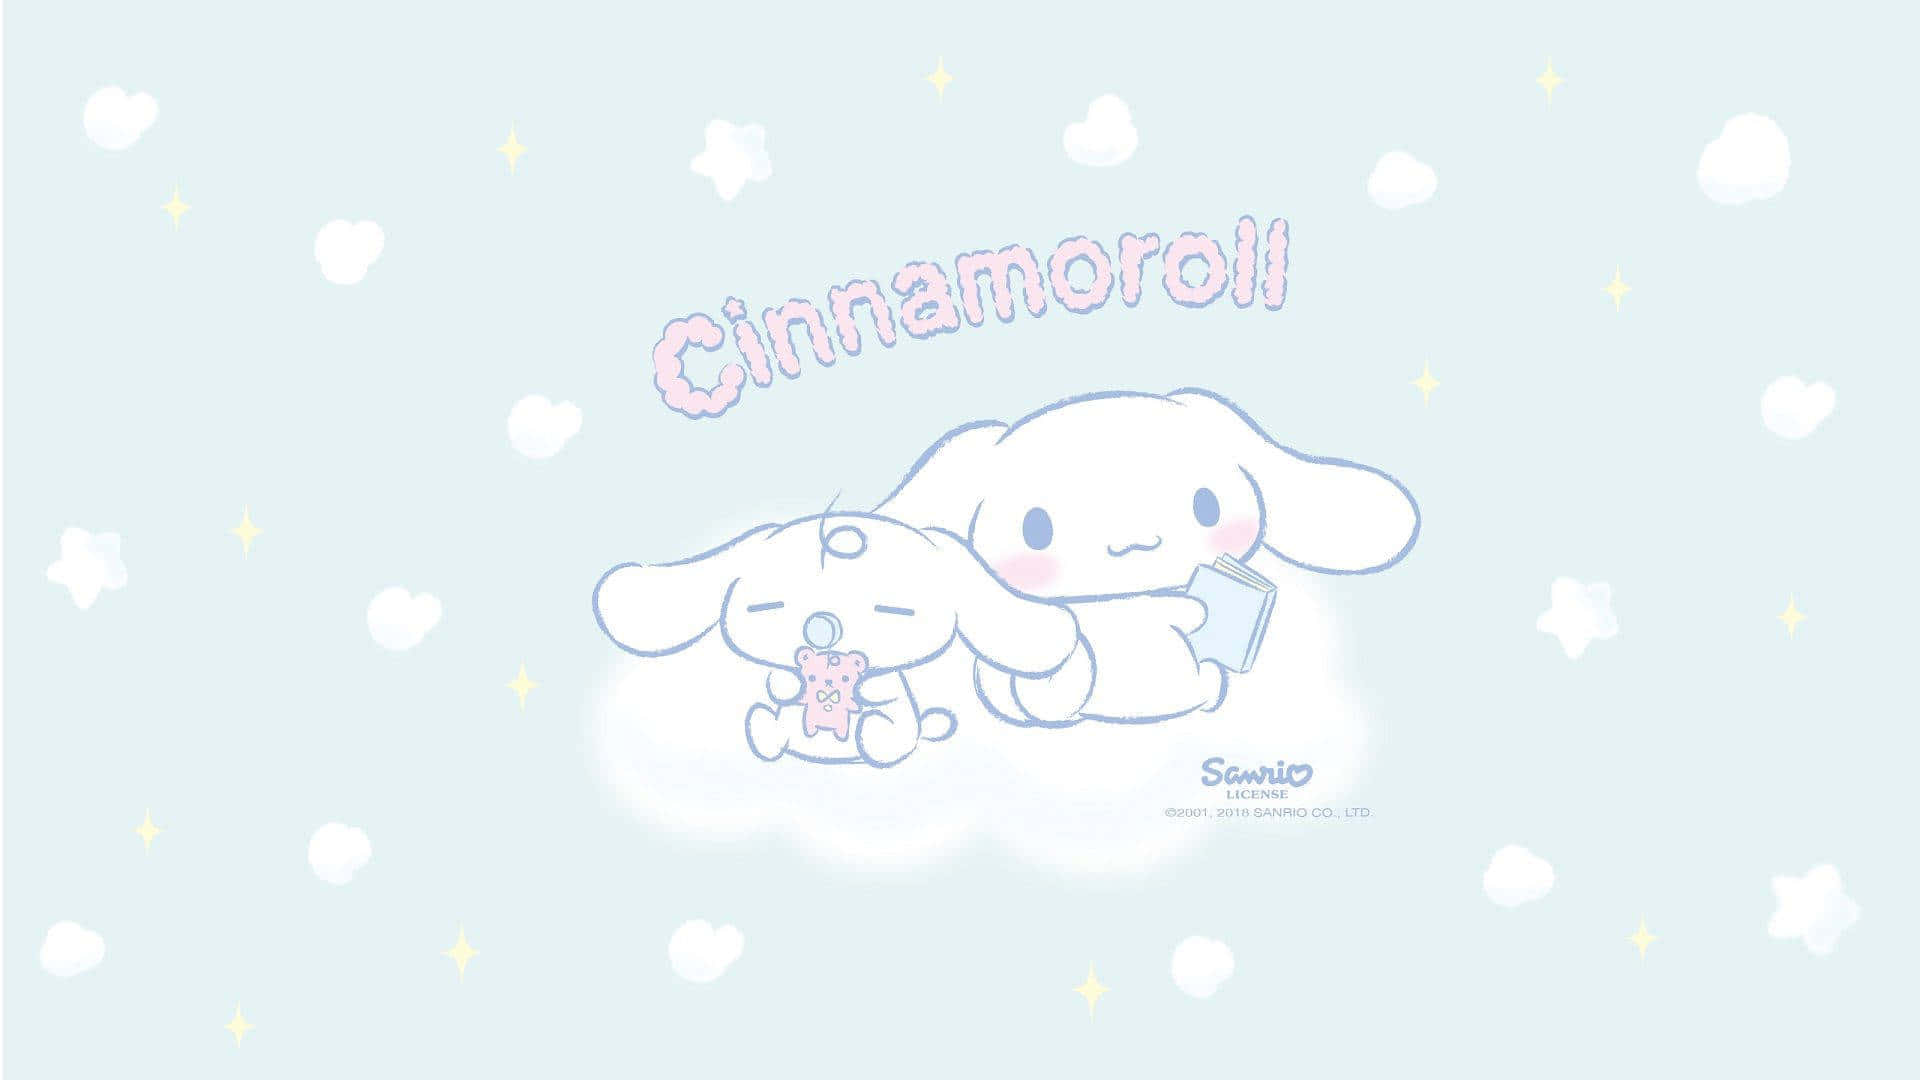 Download Cinnamoroll looks ever so cute in this adorable Sanrio